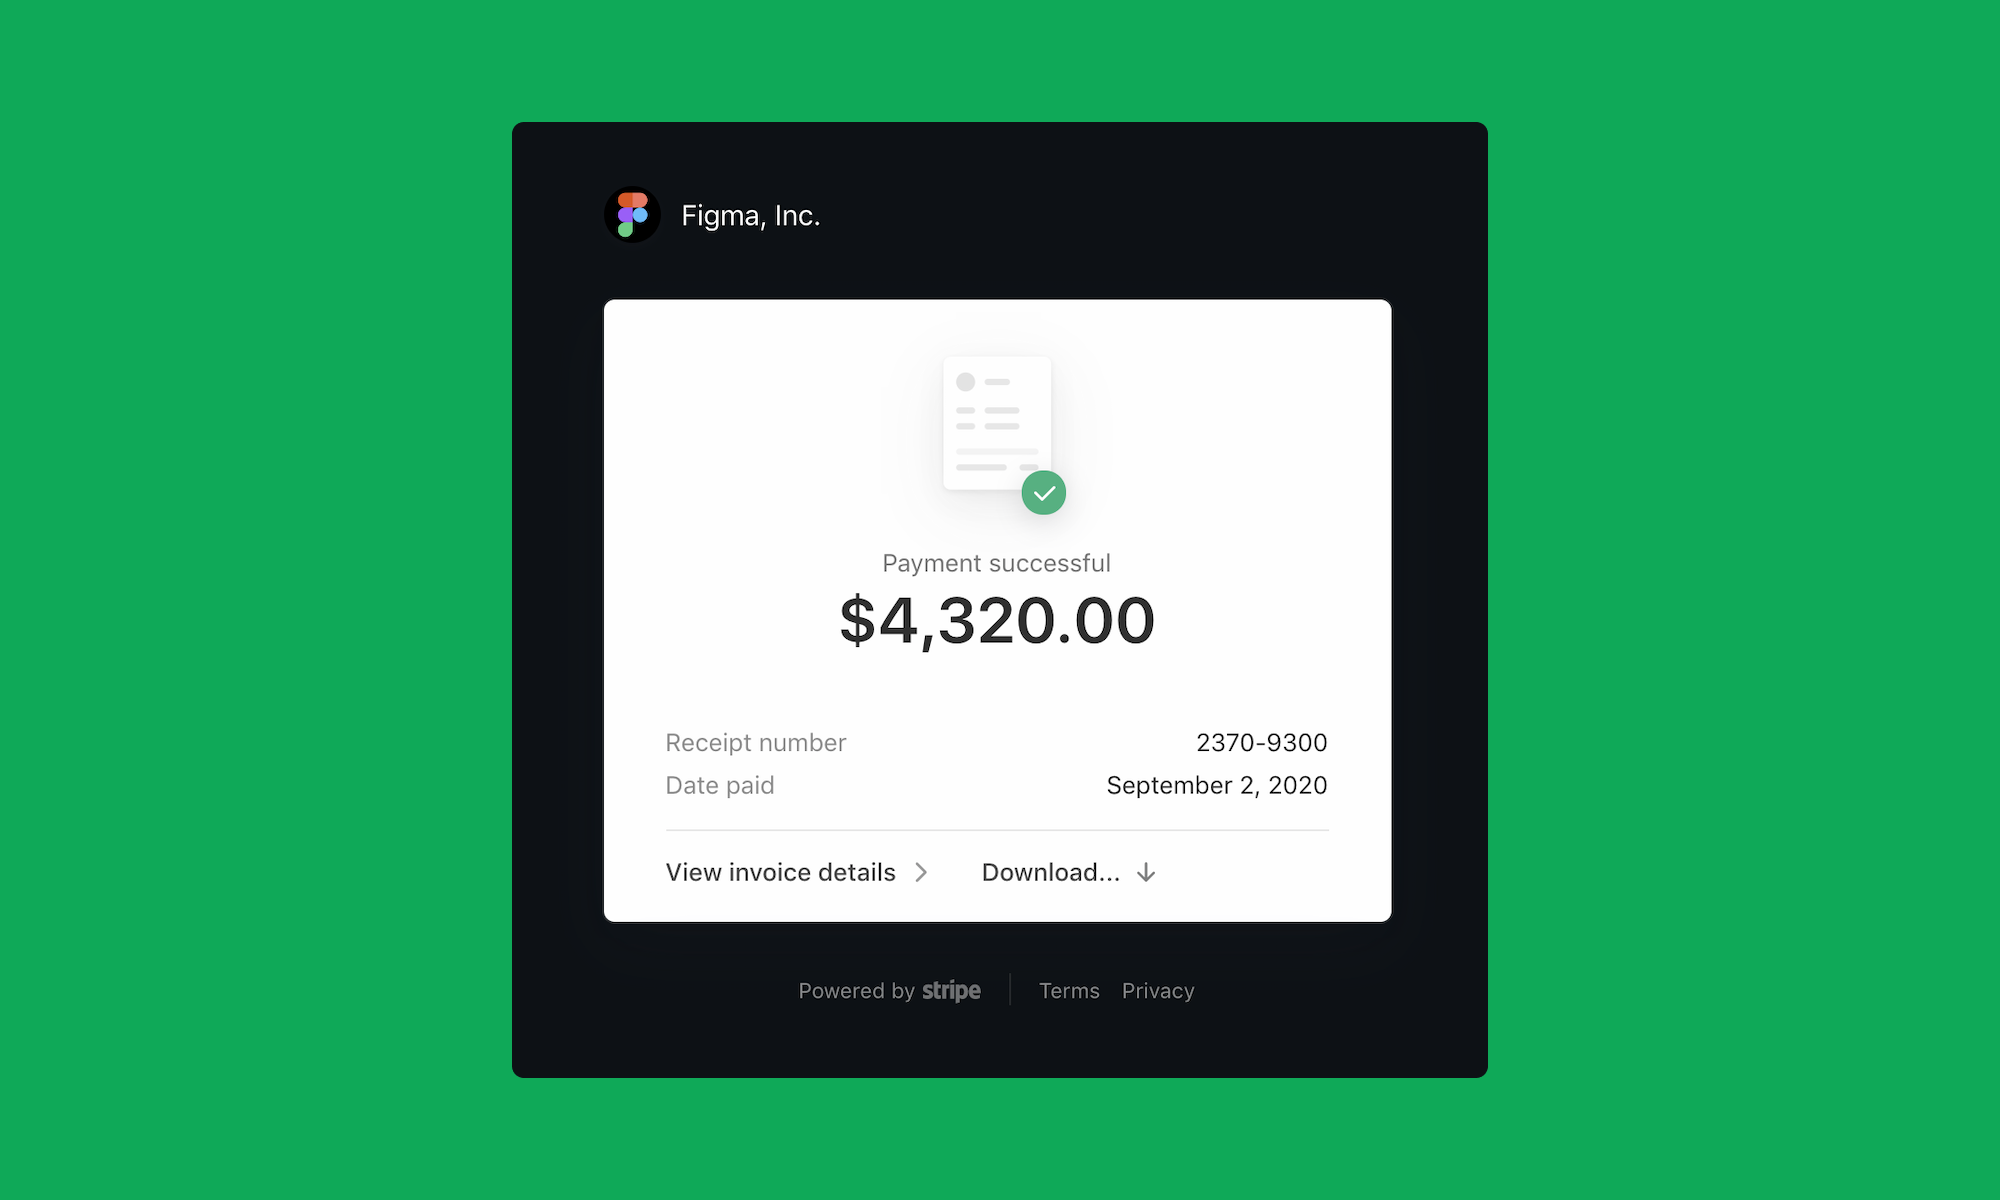 https://help.figma.com/hc/article_attachments/1500002349582/Stripe_billing_page_which_shows_the_total__receipt_number_and_date_paid_for_a_successful_payment.png